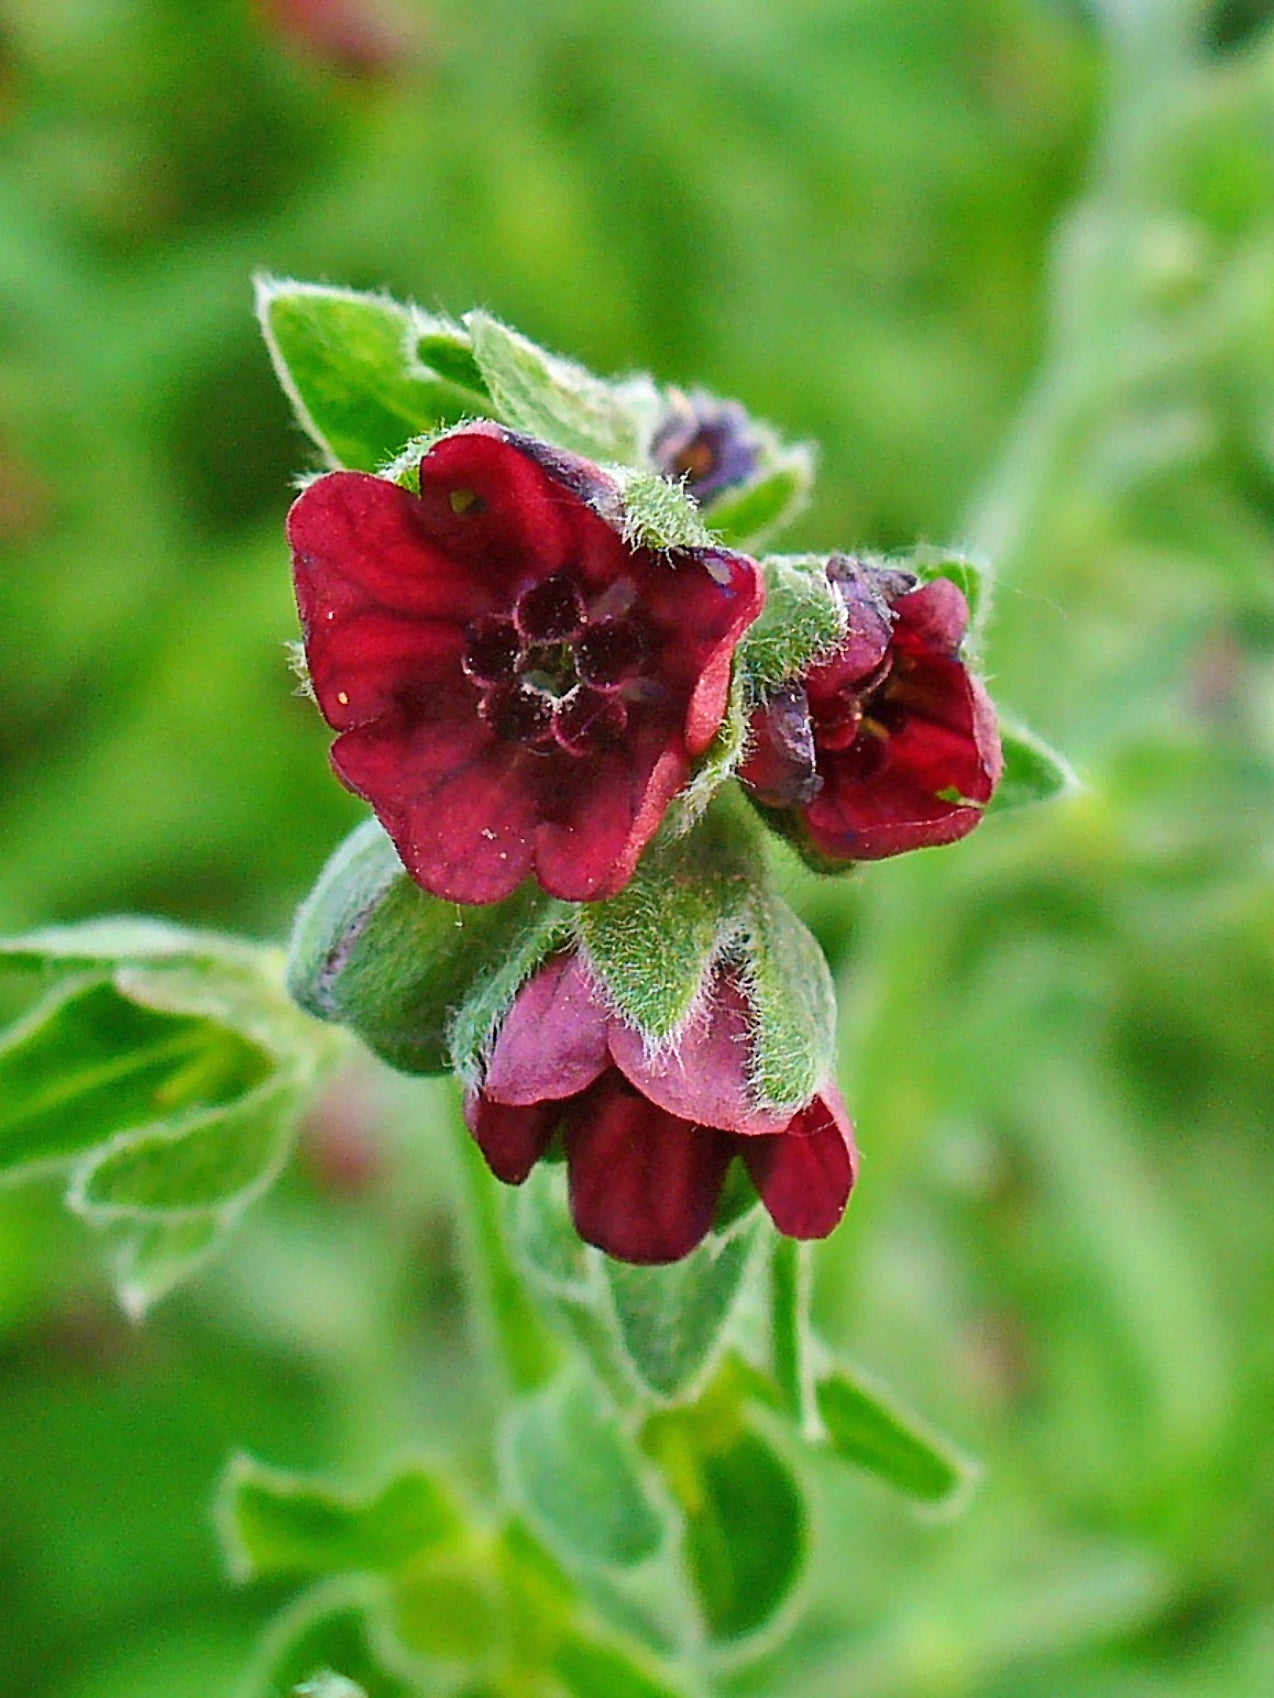 Gypsyflower Hounds Tongue (Cynoglossum officinale)